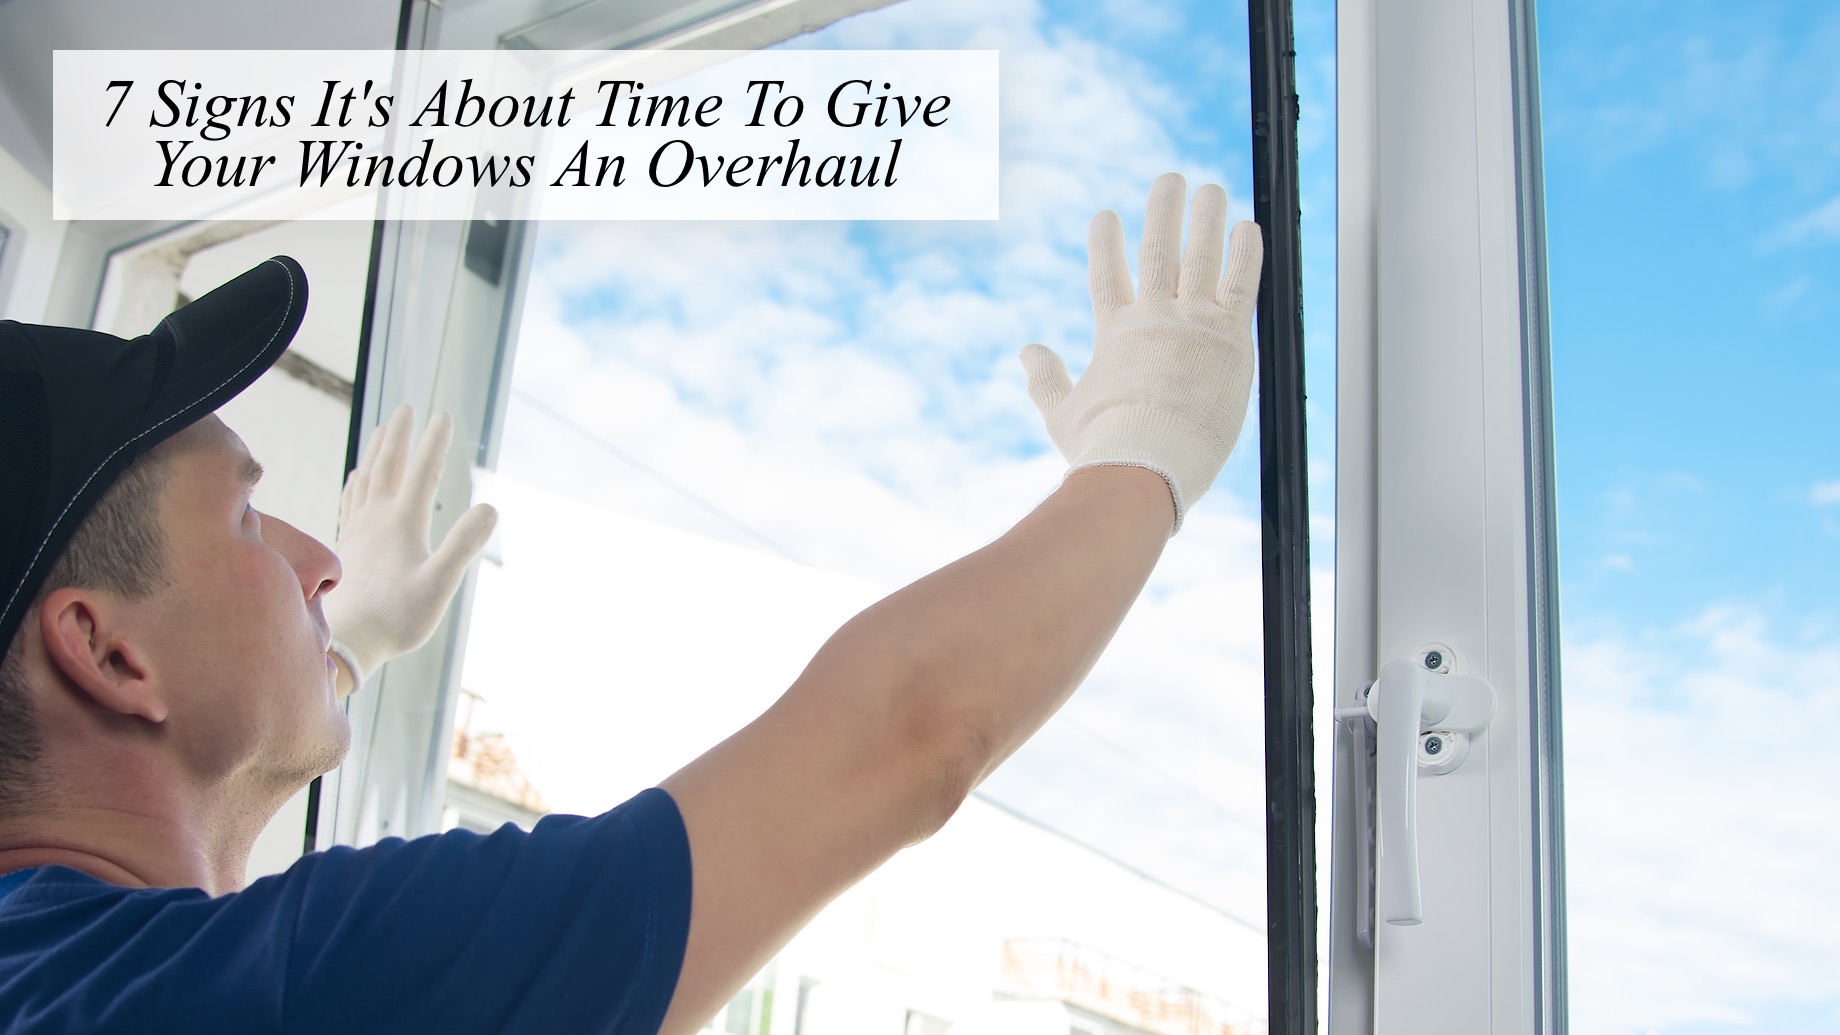 7 Signs It's About Time To Give Your Windows An Overhaul